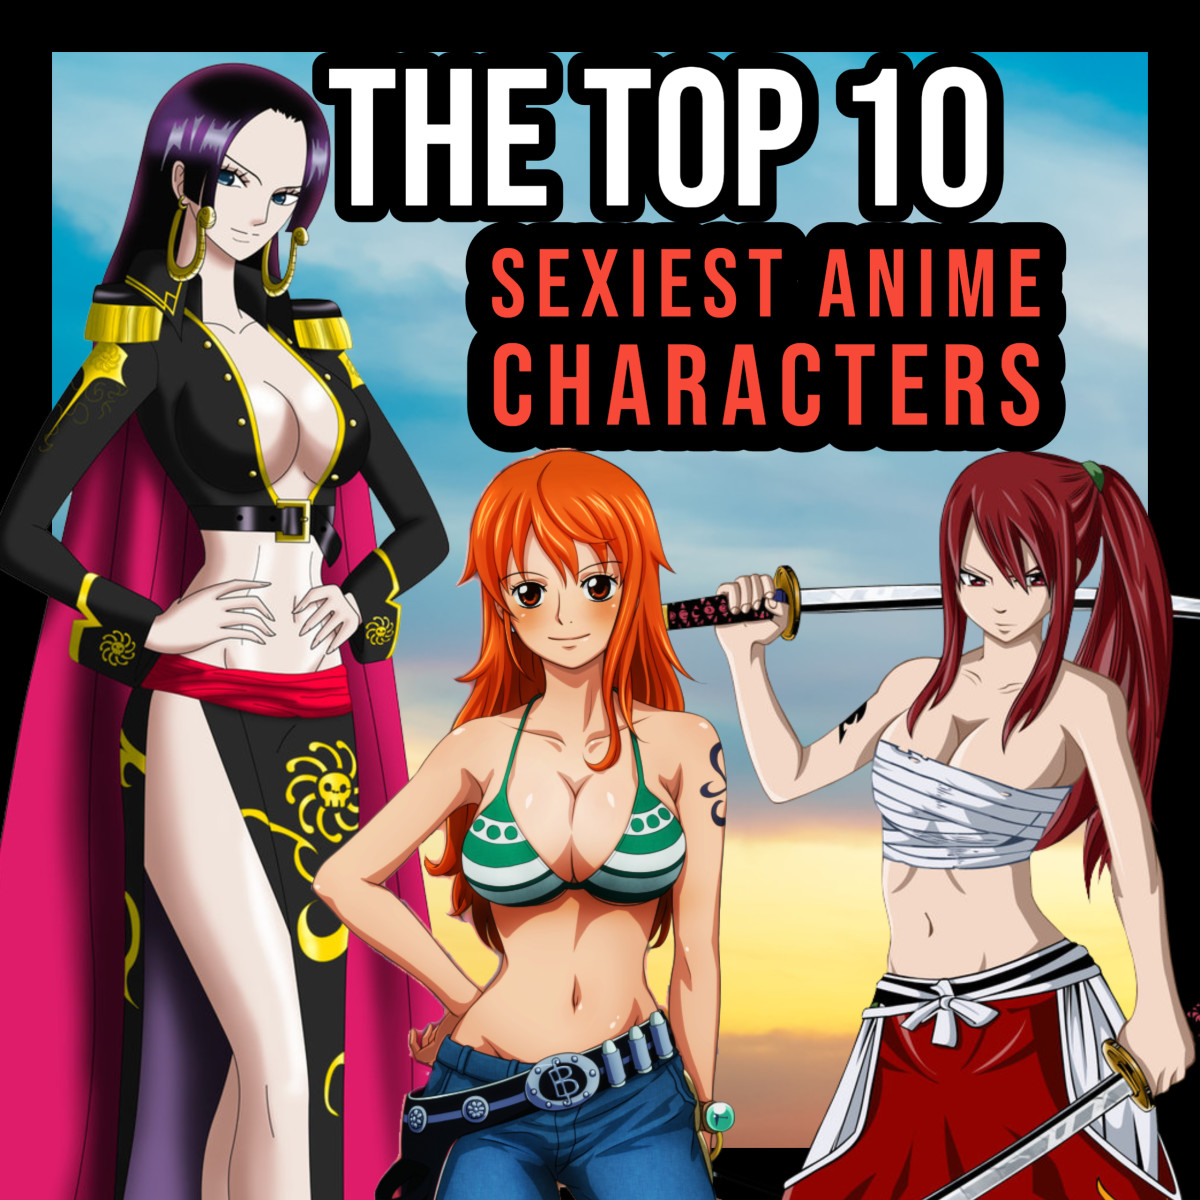 The Top 10 Sexiest Anime Characters